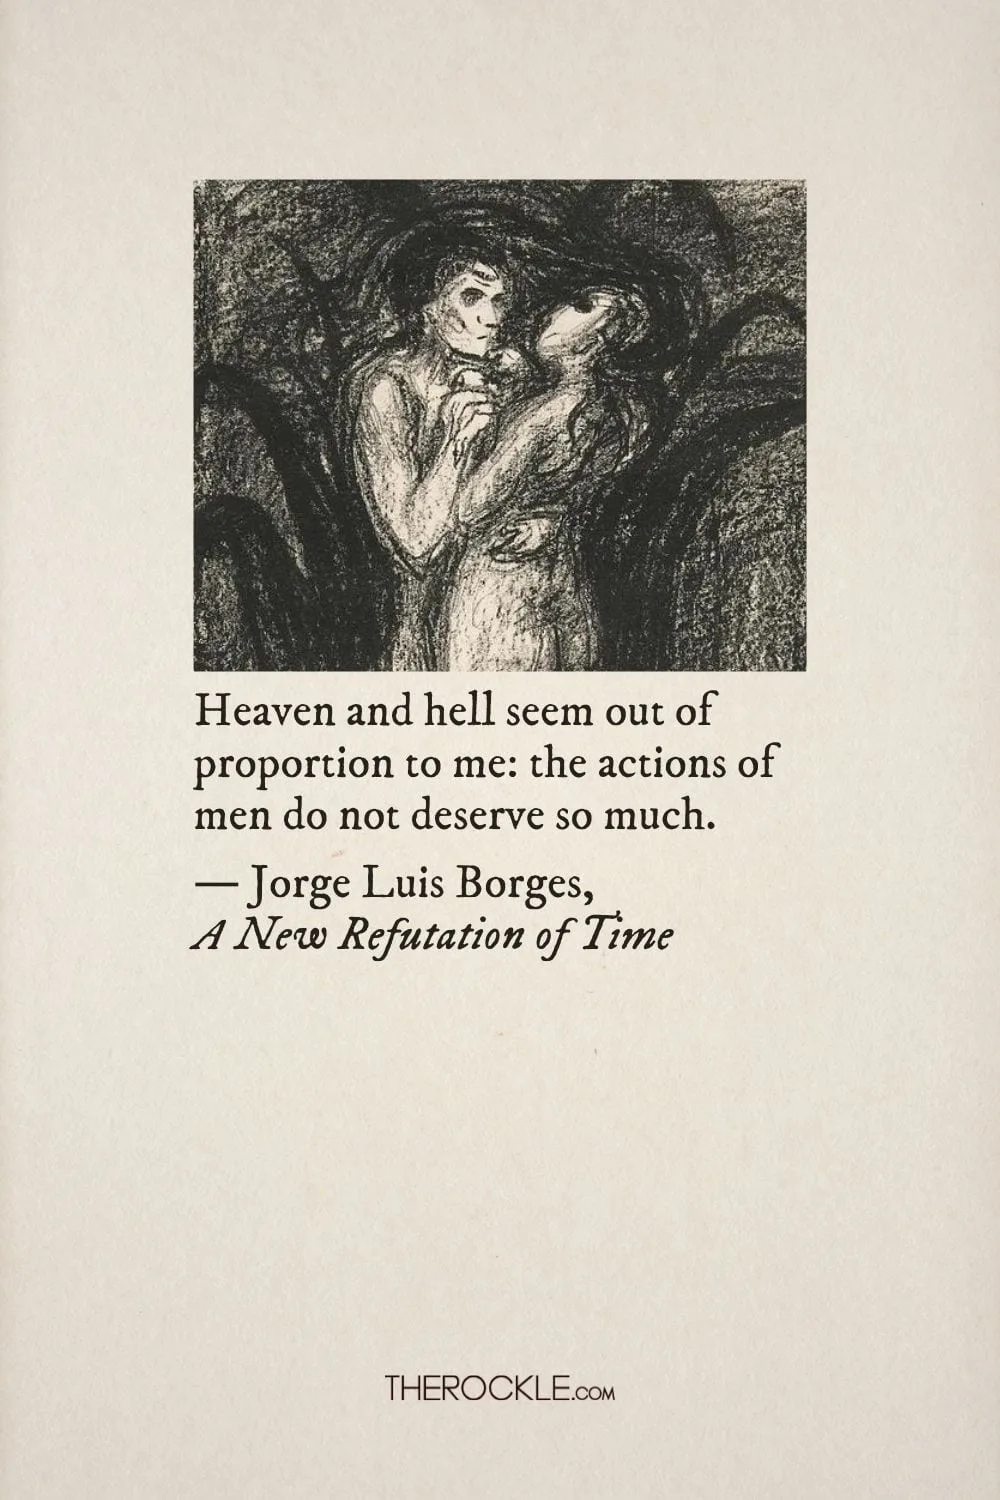 Jorge Luis Borges on heaven and hell